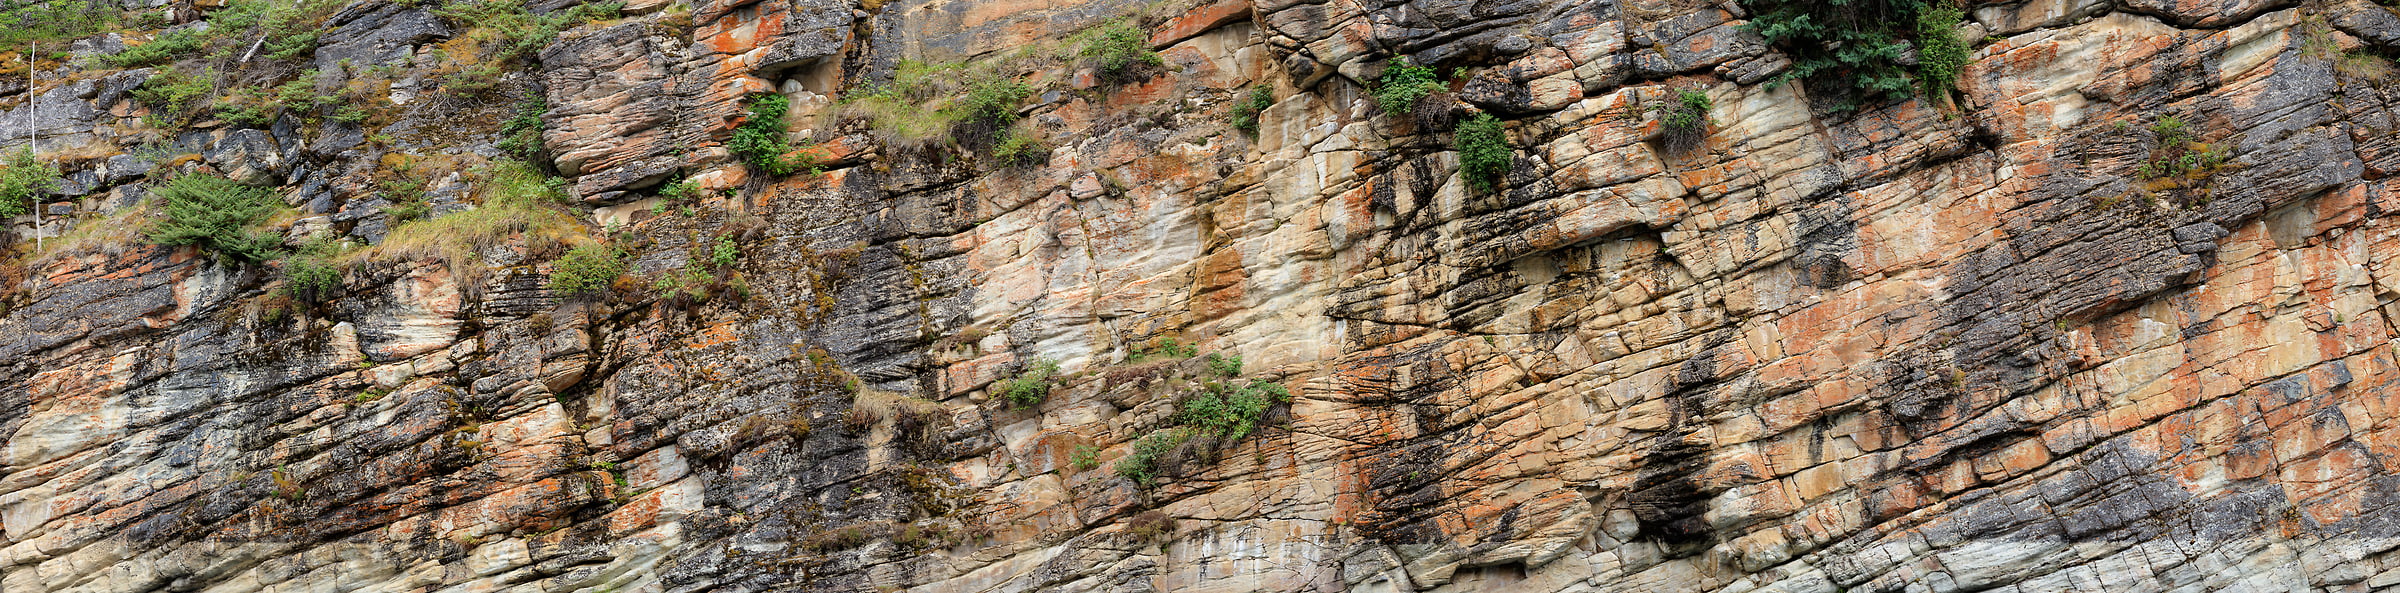 795 megapixels! A very high resolution, large-format VAST photo print of a rock wall; photograph created by Scott Dimond in Jasper National Park, Alberta, Canada